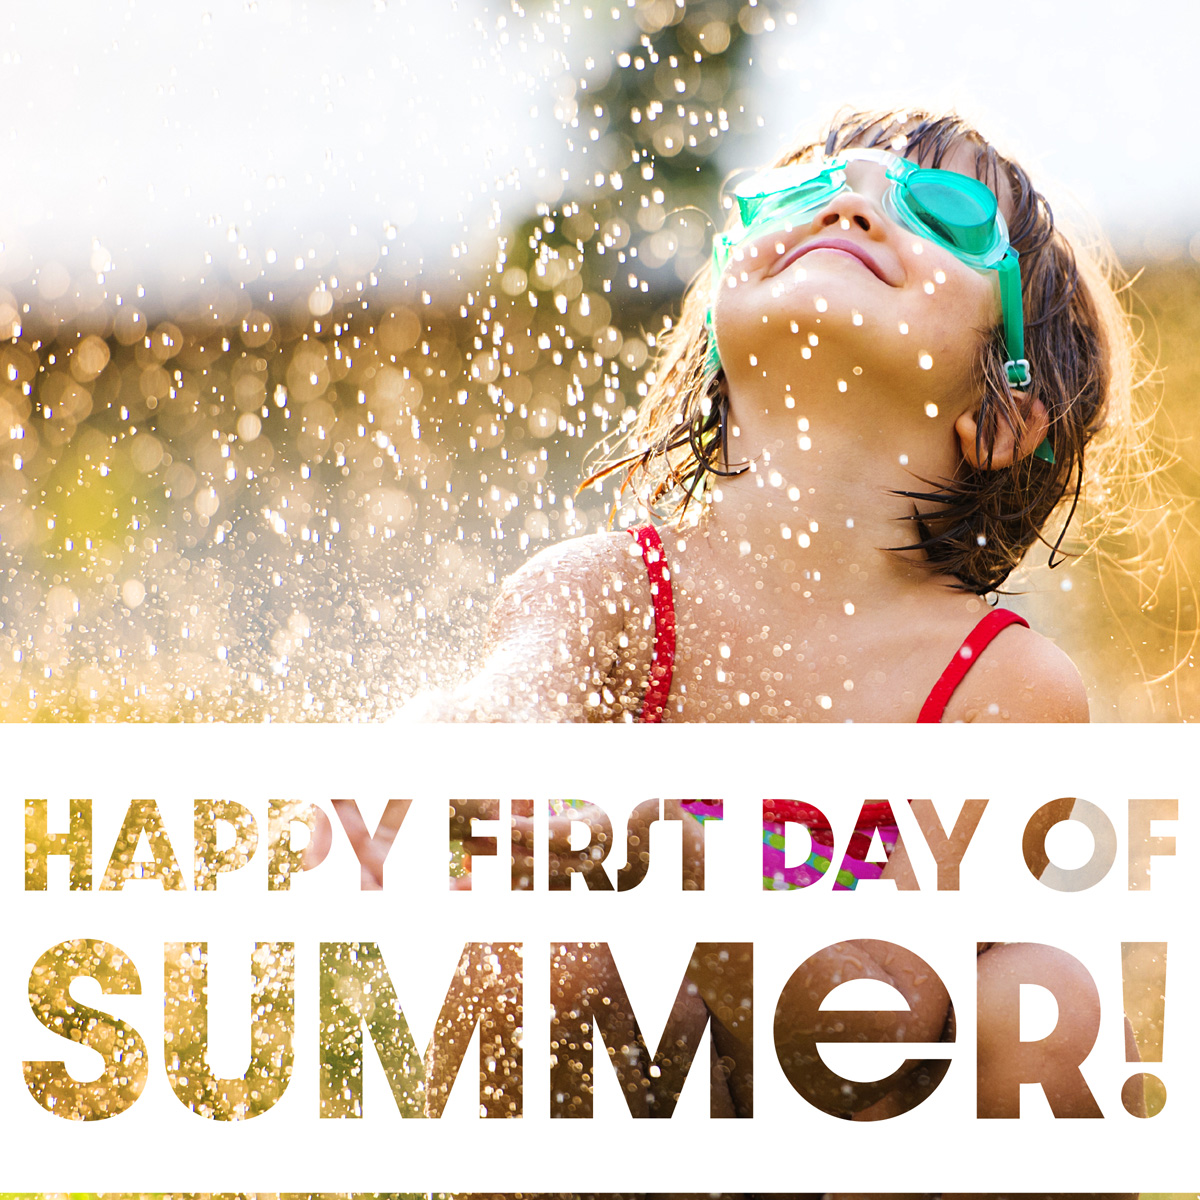 It's the first day of summer and it's time to change with the seasons! If you're in the market for a new home, we can help get you to the closing table in an average of 20 days or less. Contact us us today. #Summer